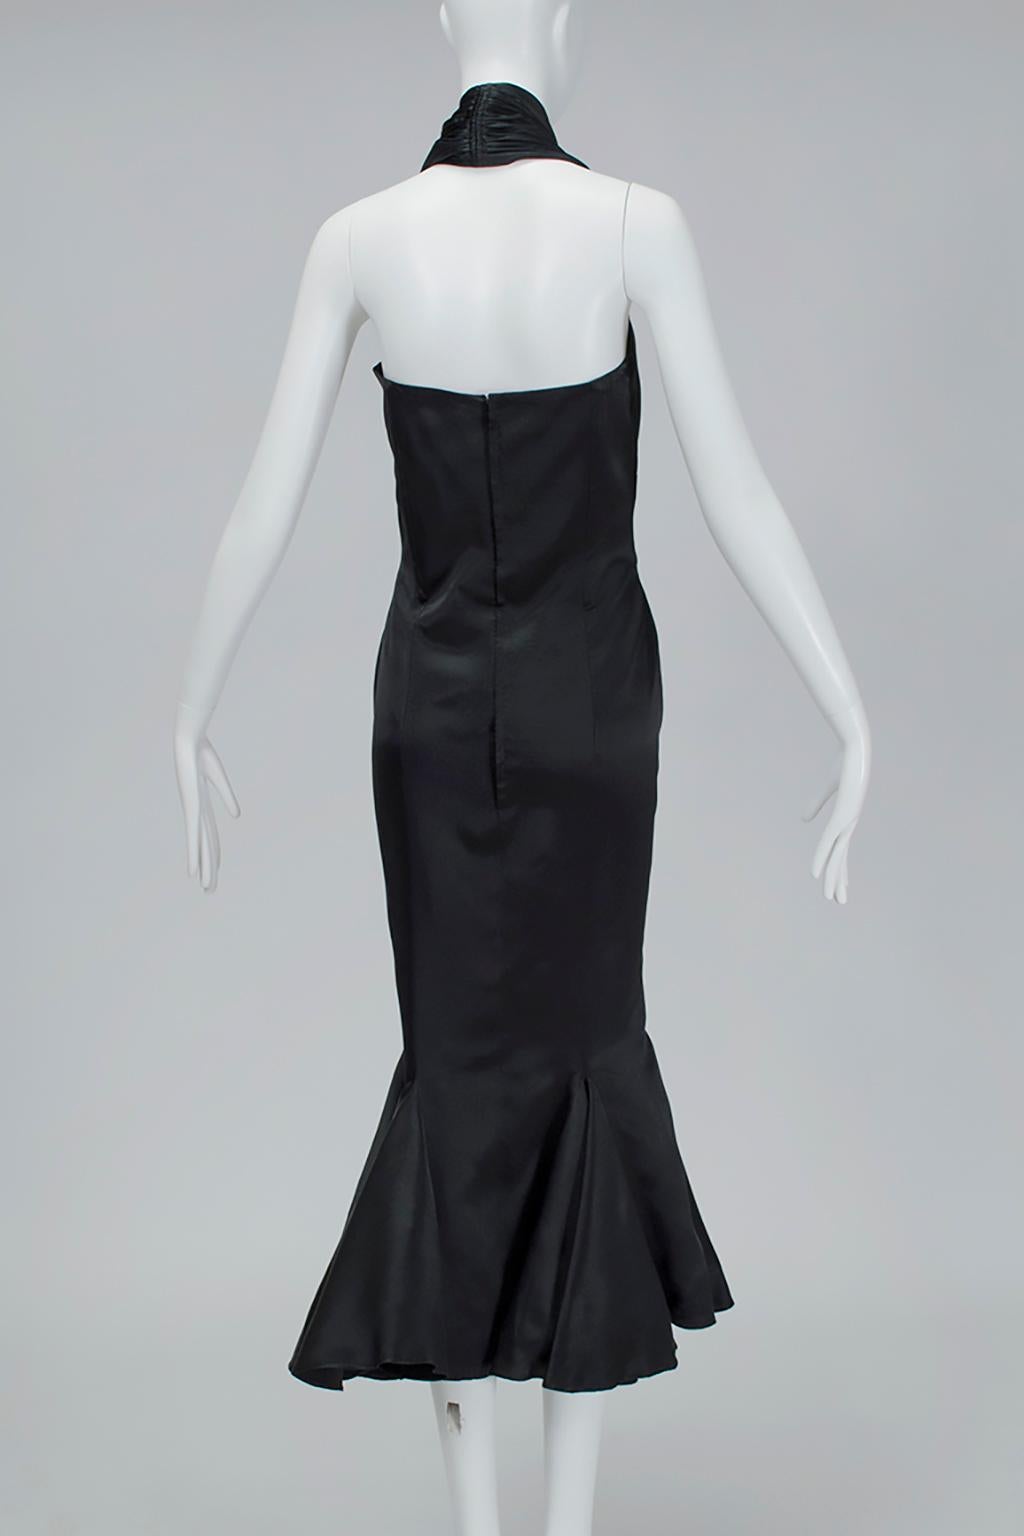 Golden Age Backless Black Satin Halter Plunge Gown with Trumpet Hem - L, 1930s In Excellent Condition For Sale In Tucson, AZ